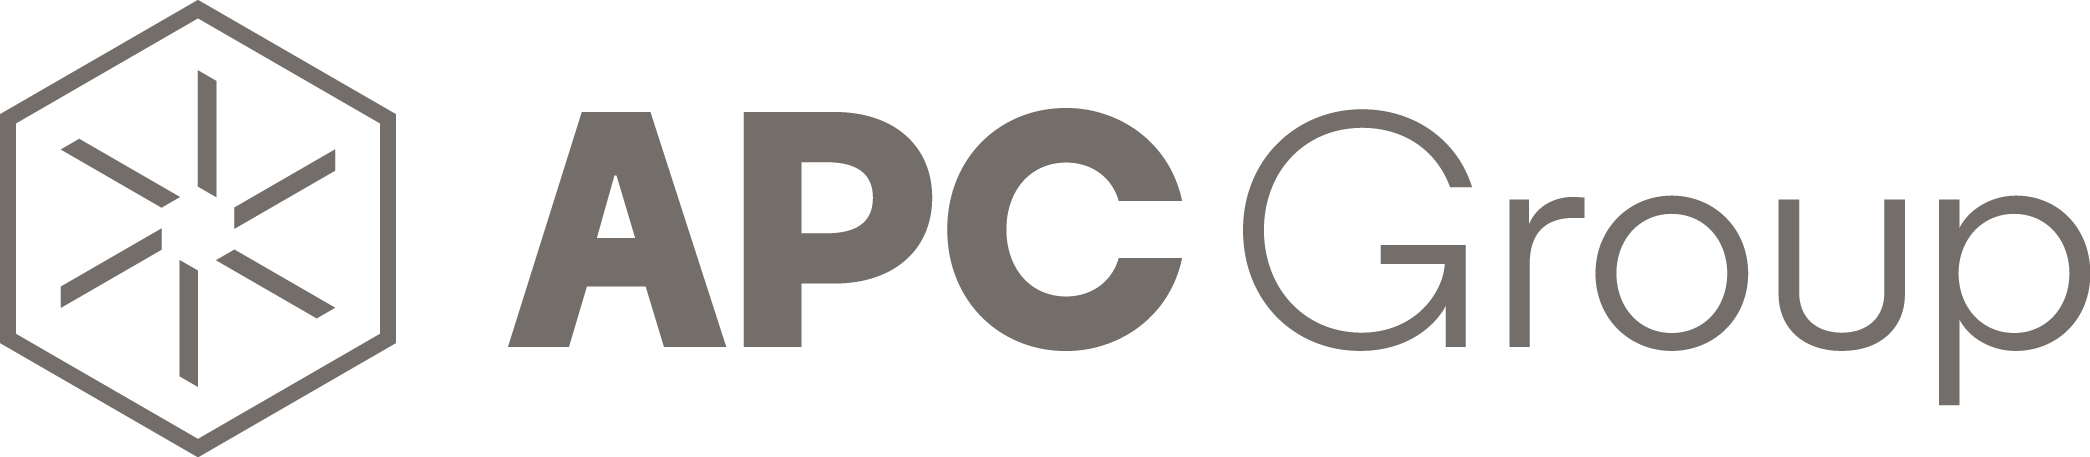 Apcer PNG - 30908